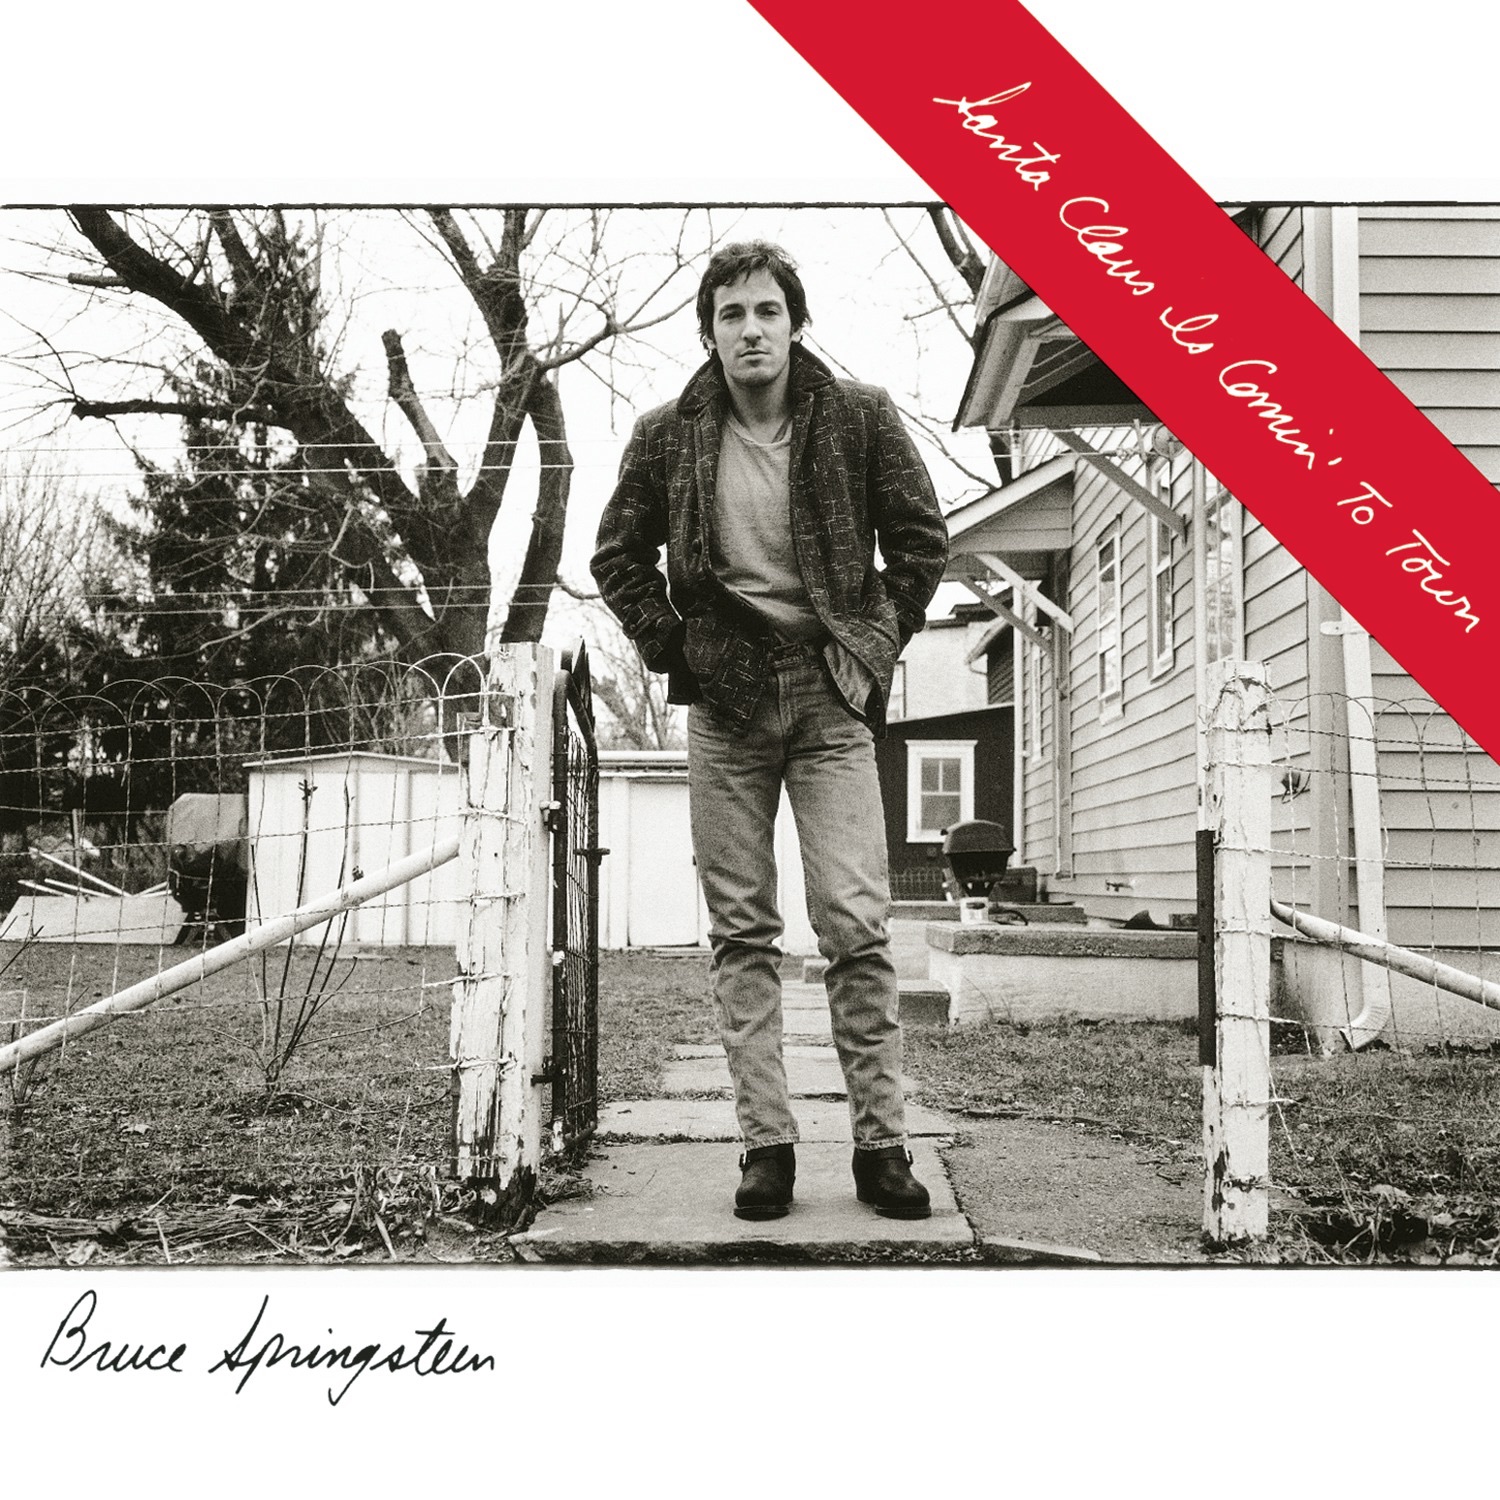 Bruce Springsteen - Santa Claus Is Comin' to Town - Single